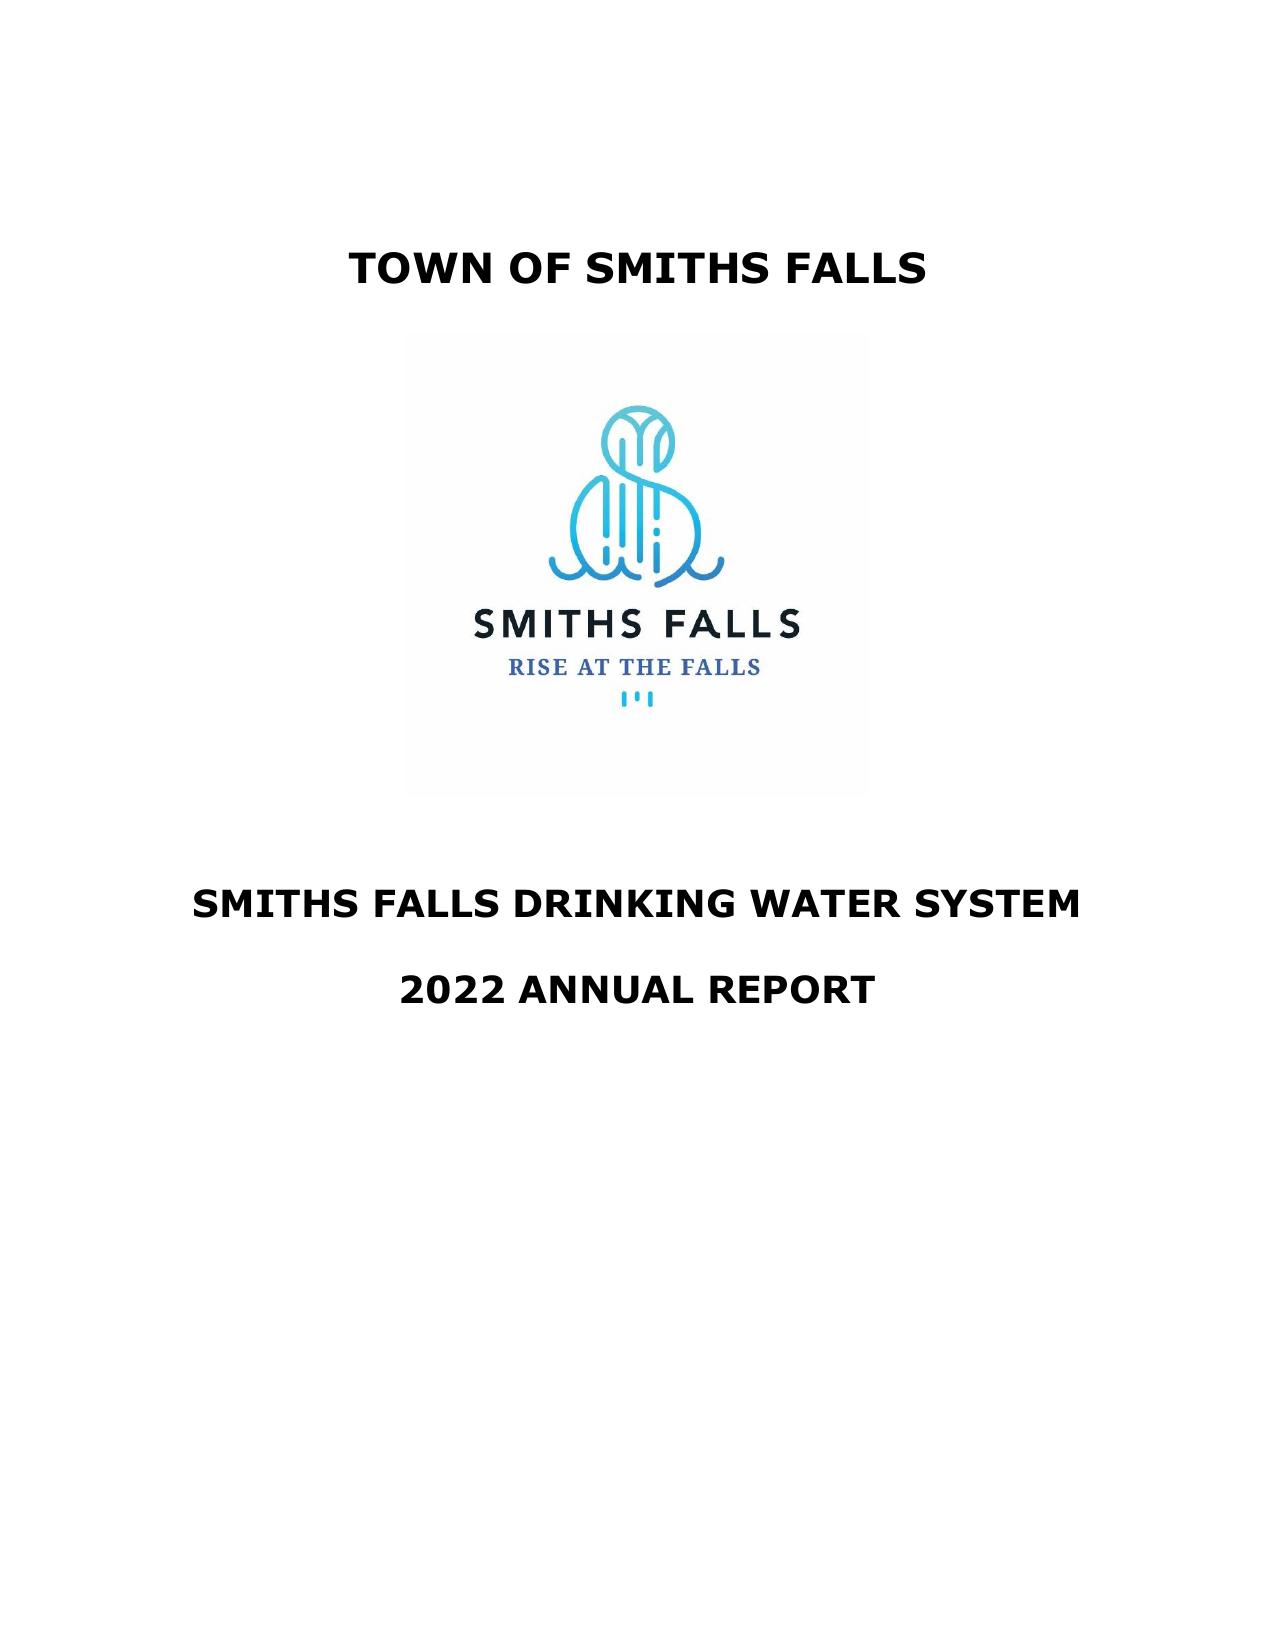 SMITHSFALLS 2022 Annual Report